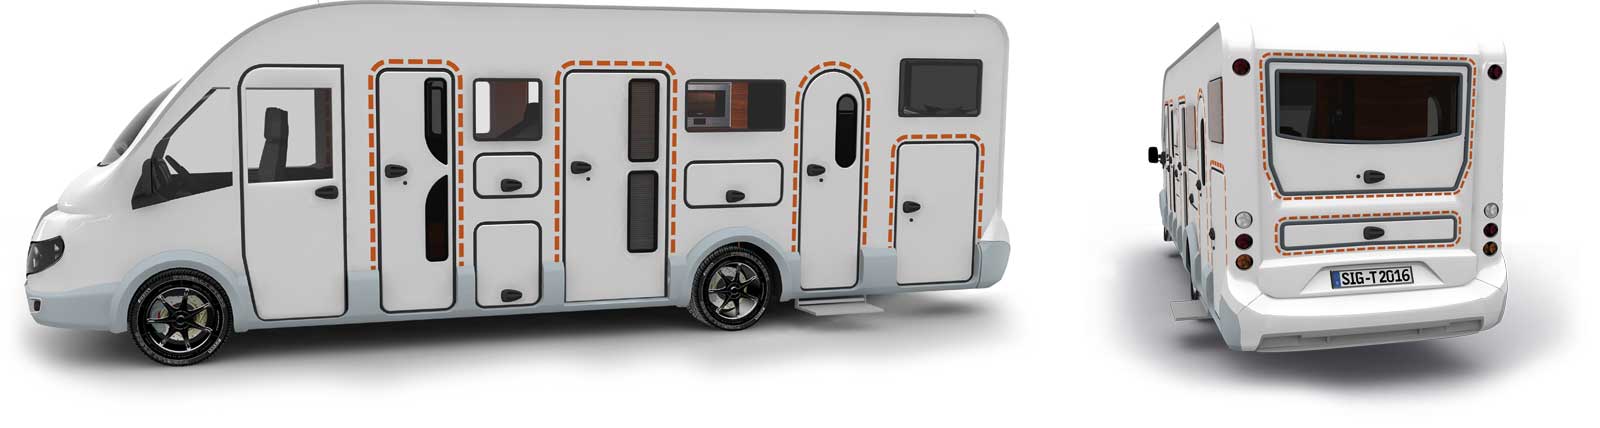 keyless entry system for RV´s recreational vehicles, caravans and mobile homes